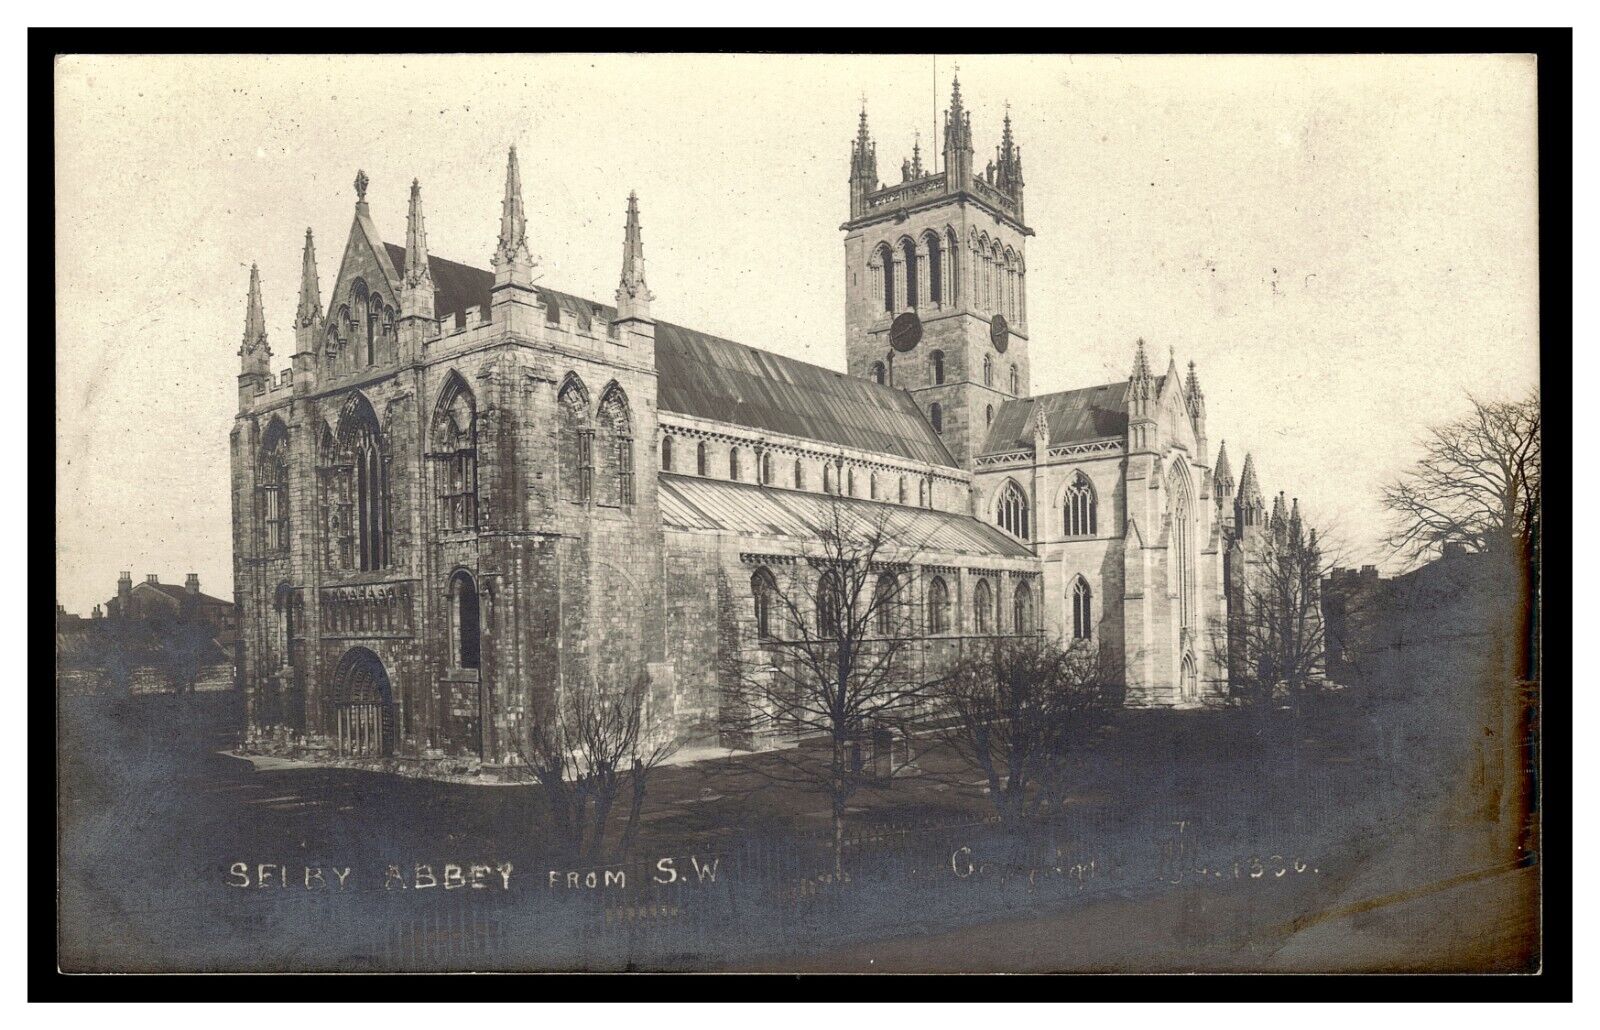 SELBY ABBEY FROM S.W. VINTAGE REAL PHOTO POSTCARD RPPC ALFRED LOUGHTON PHOTO